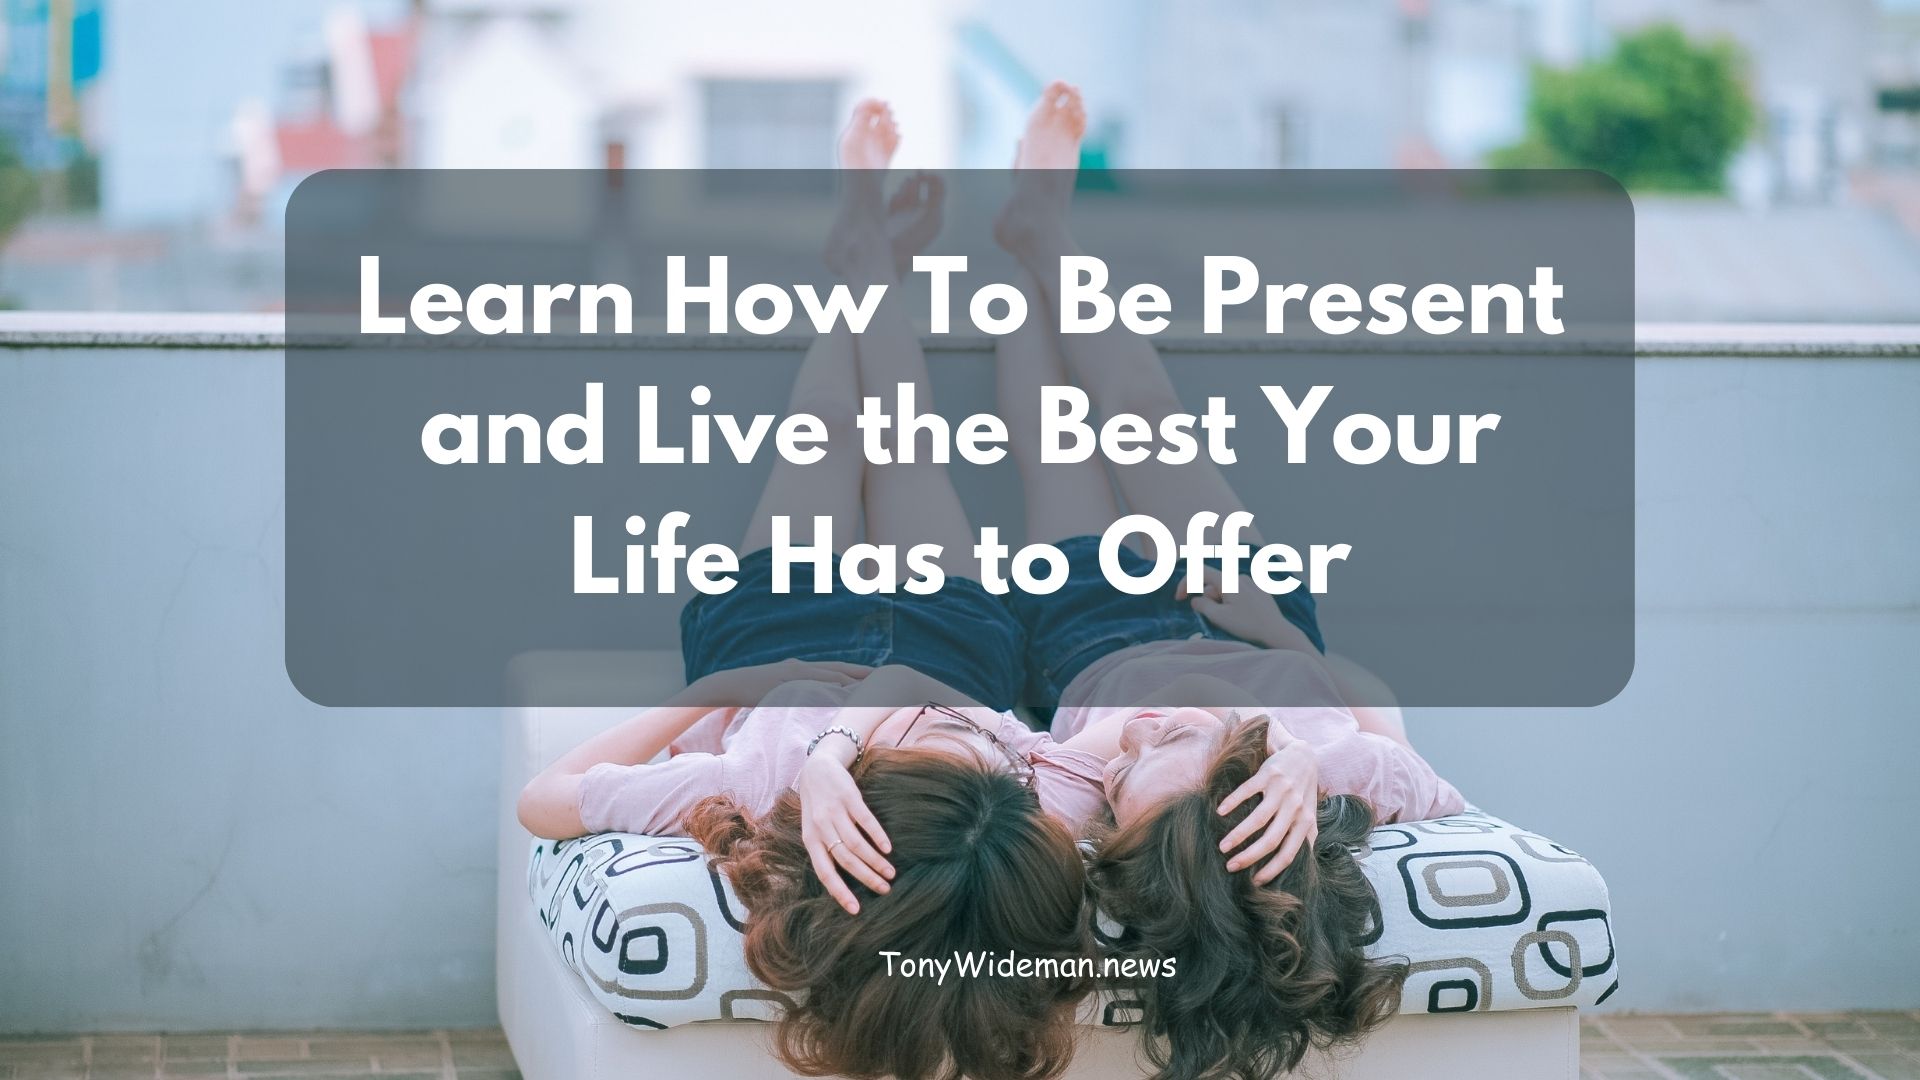 Learn How To Be Present and Live the Best Your Life Has to Offer